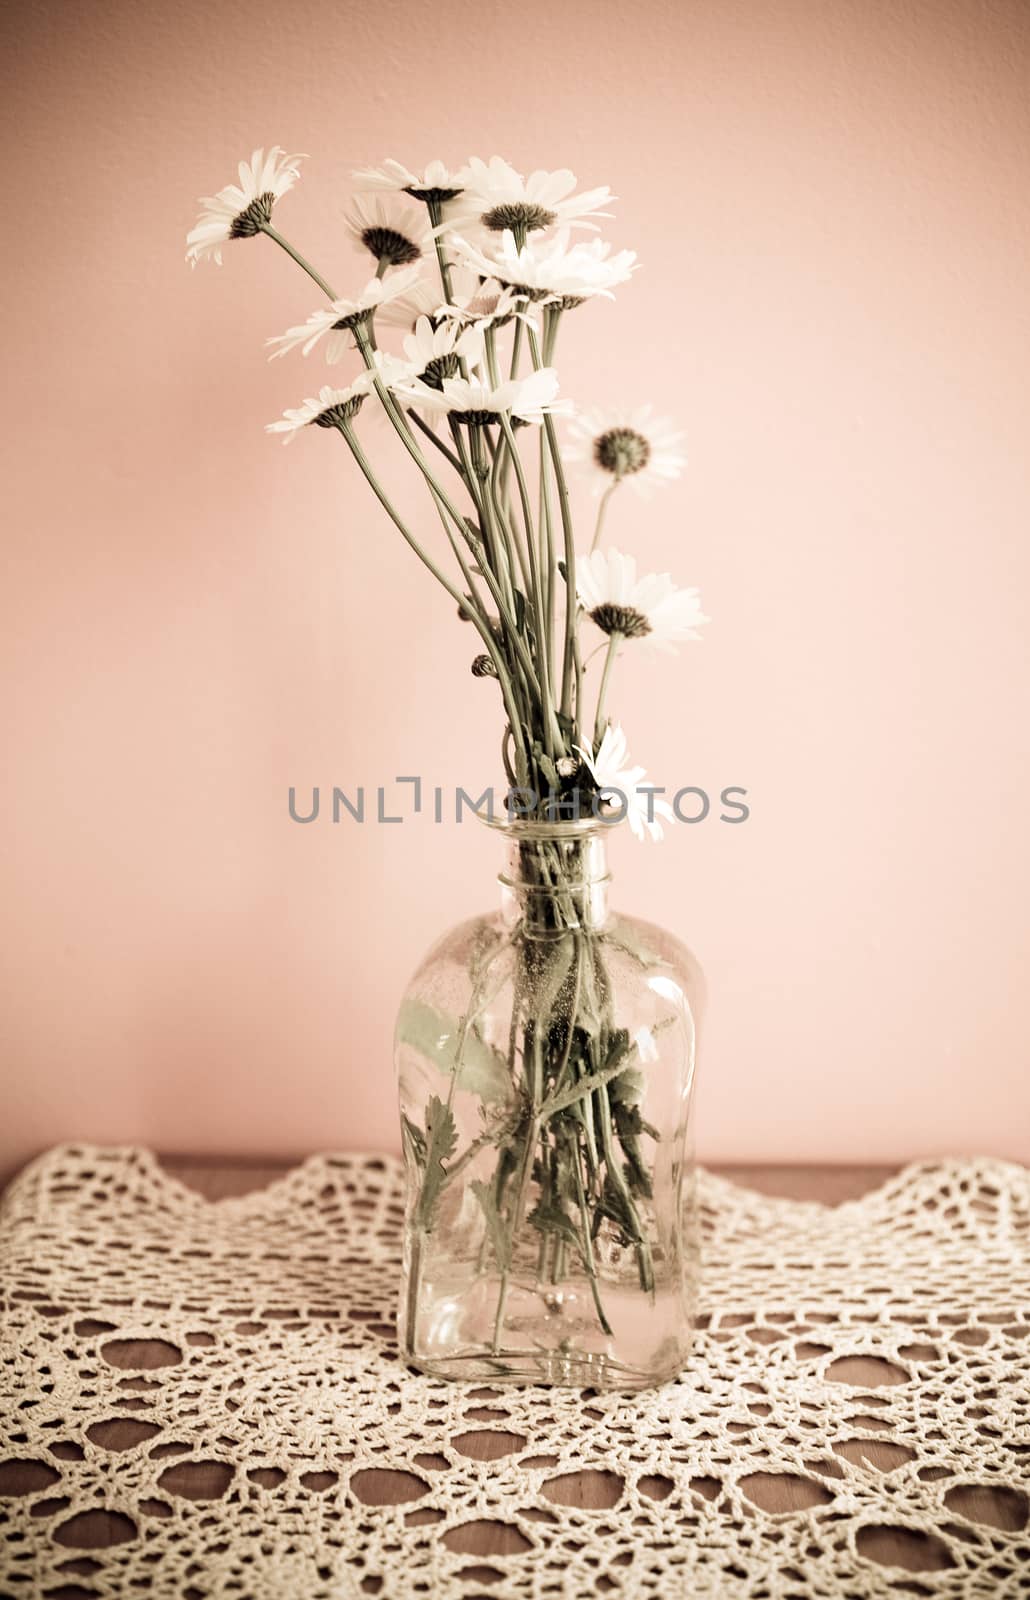  bouquet of white summer camomiles in a vase on an orange backgr by Lukrecja